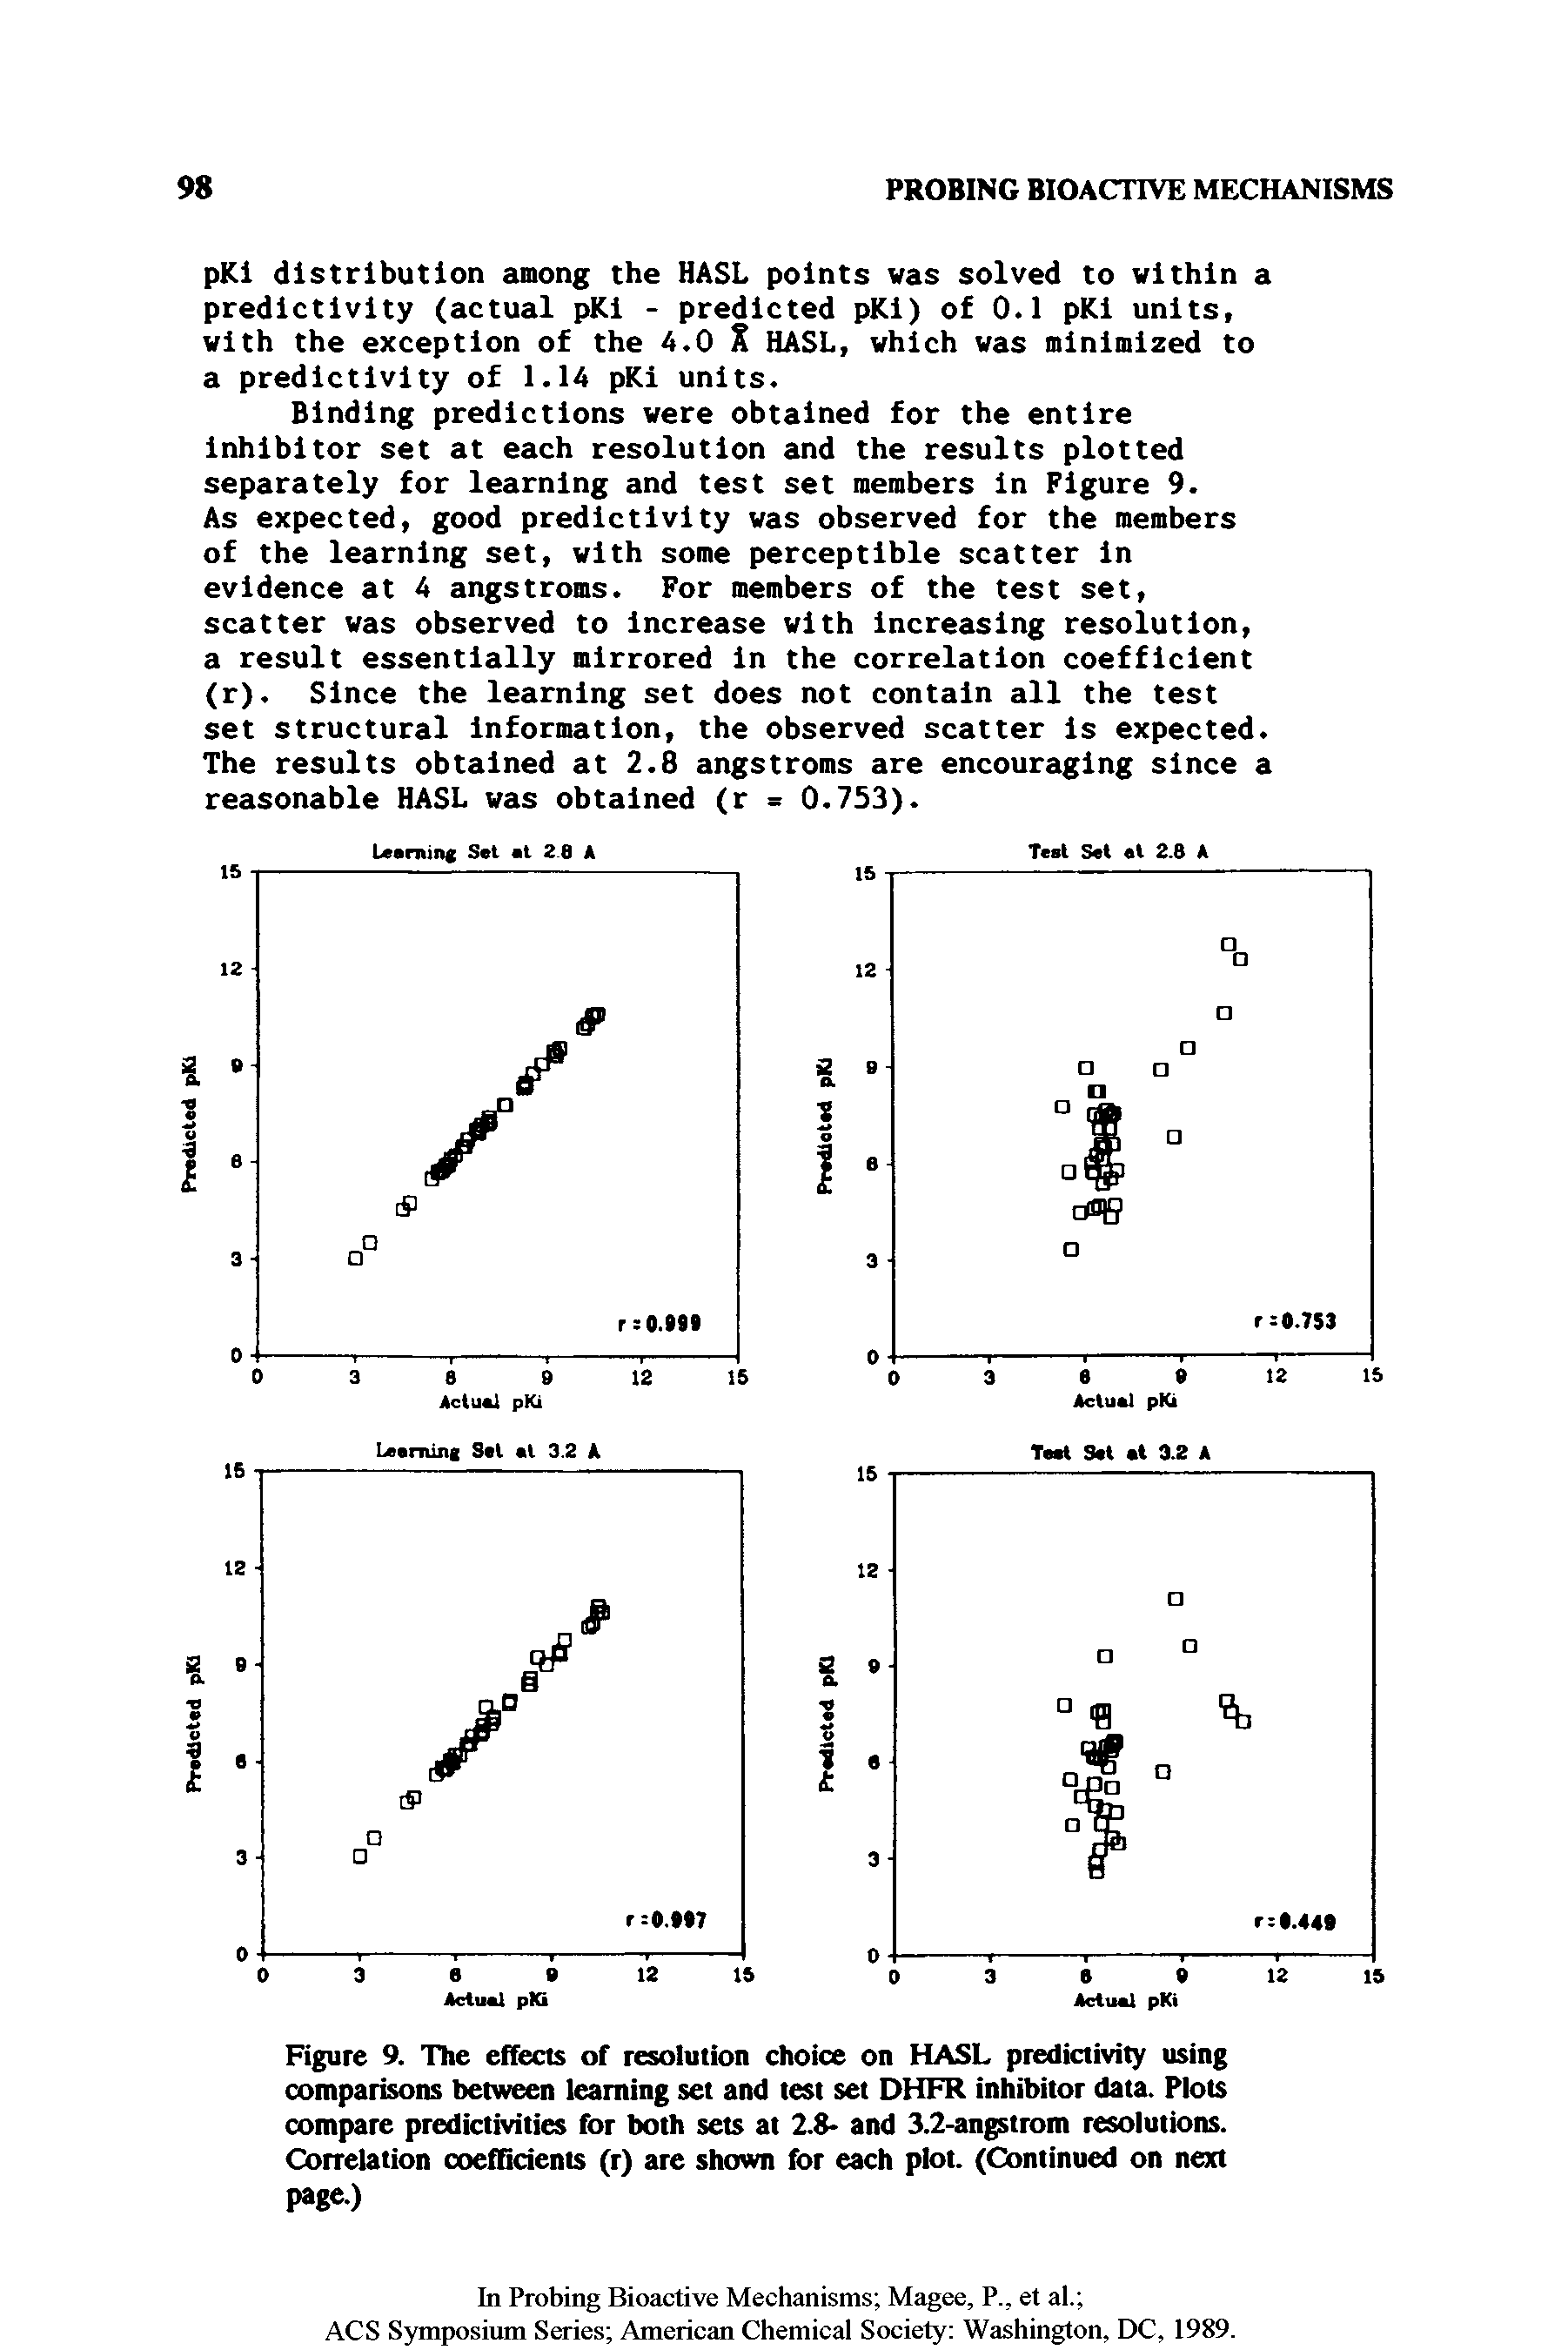 Figure 9. The effects of resolution choice on HASL predictivity using comparisons between learning set and test set DHFR inhibitor data. Plots compare predictivities for both sets at 2.. and 3.2-angstrom resolutions. Correlation coefficients (r) are shown for each plot. (Continued on next page)...